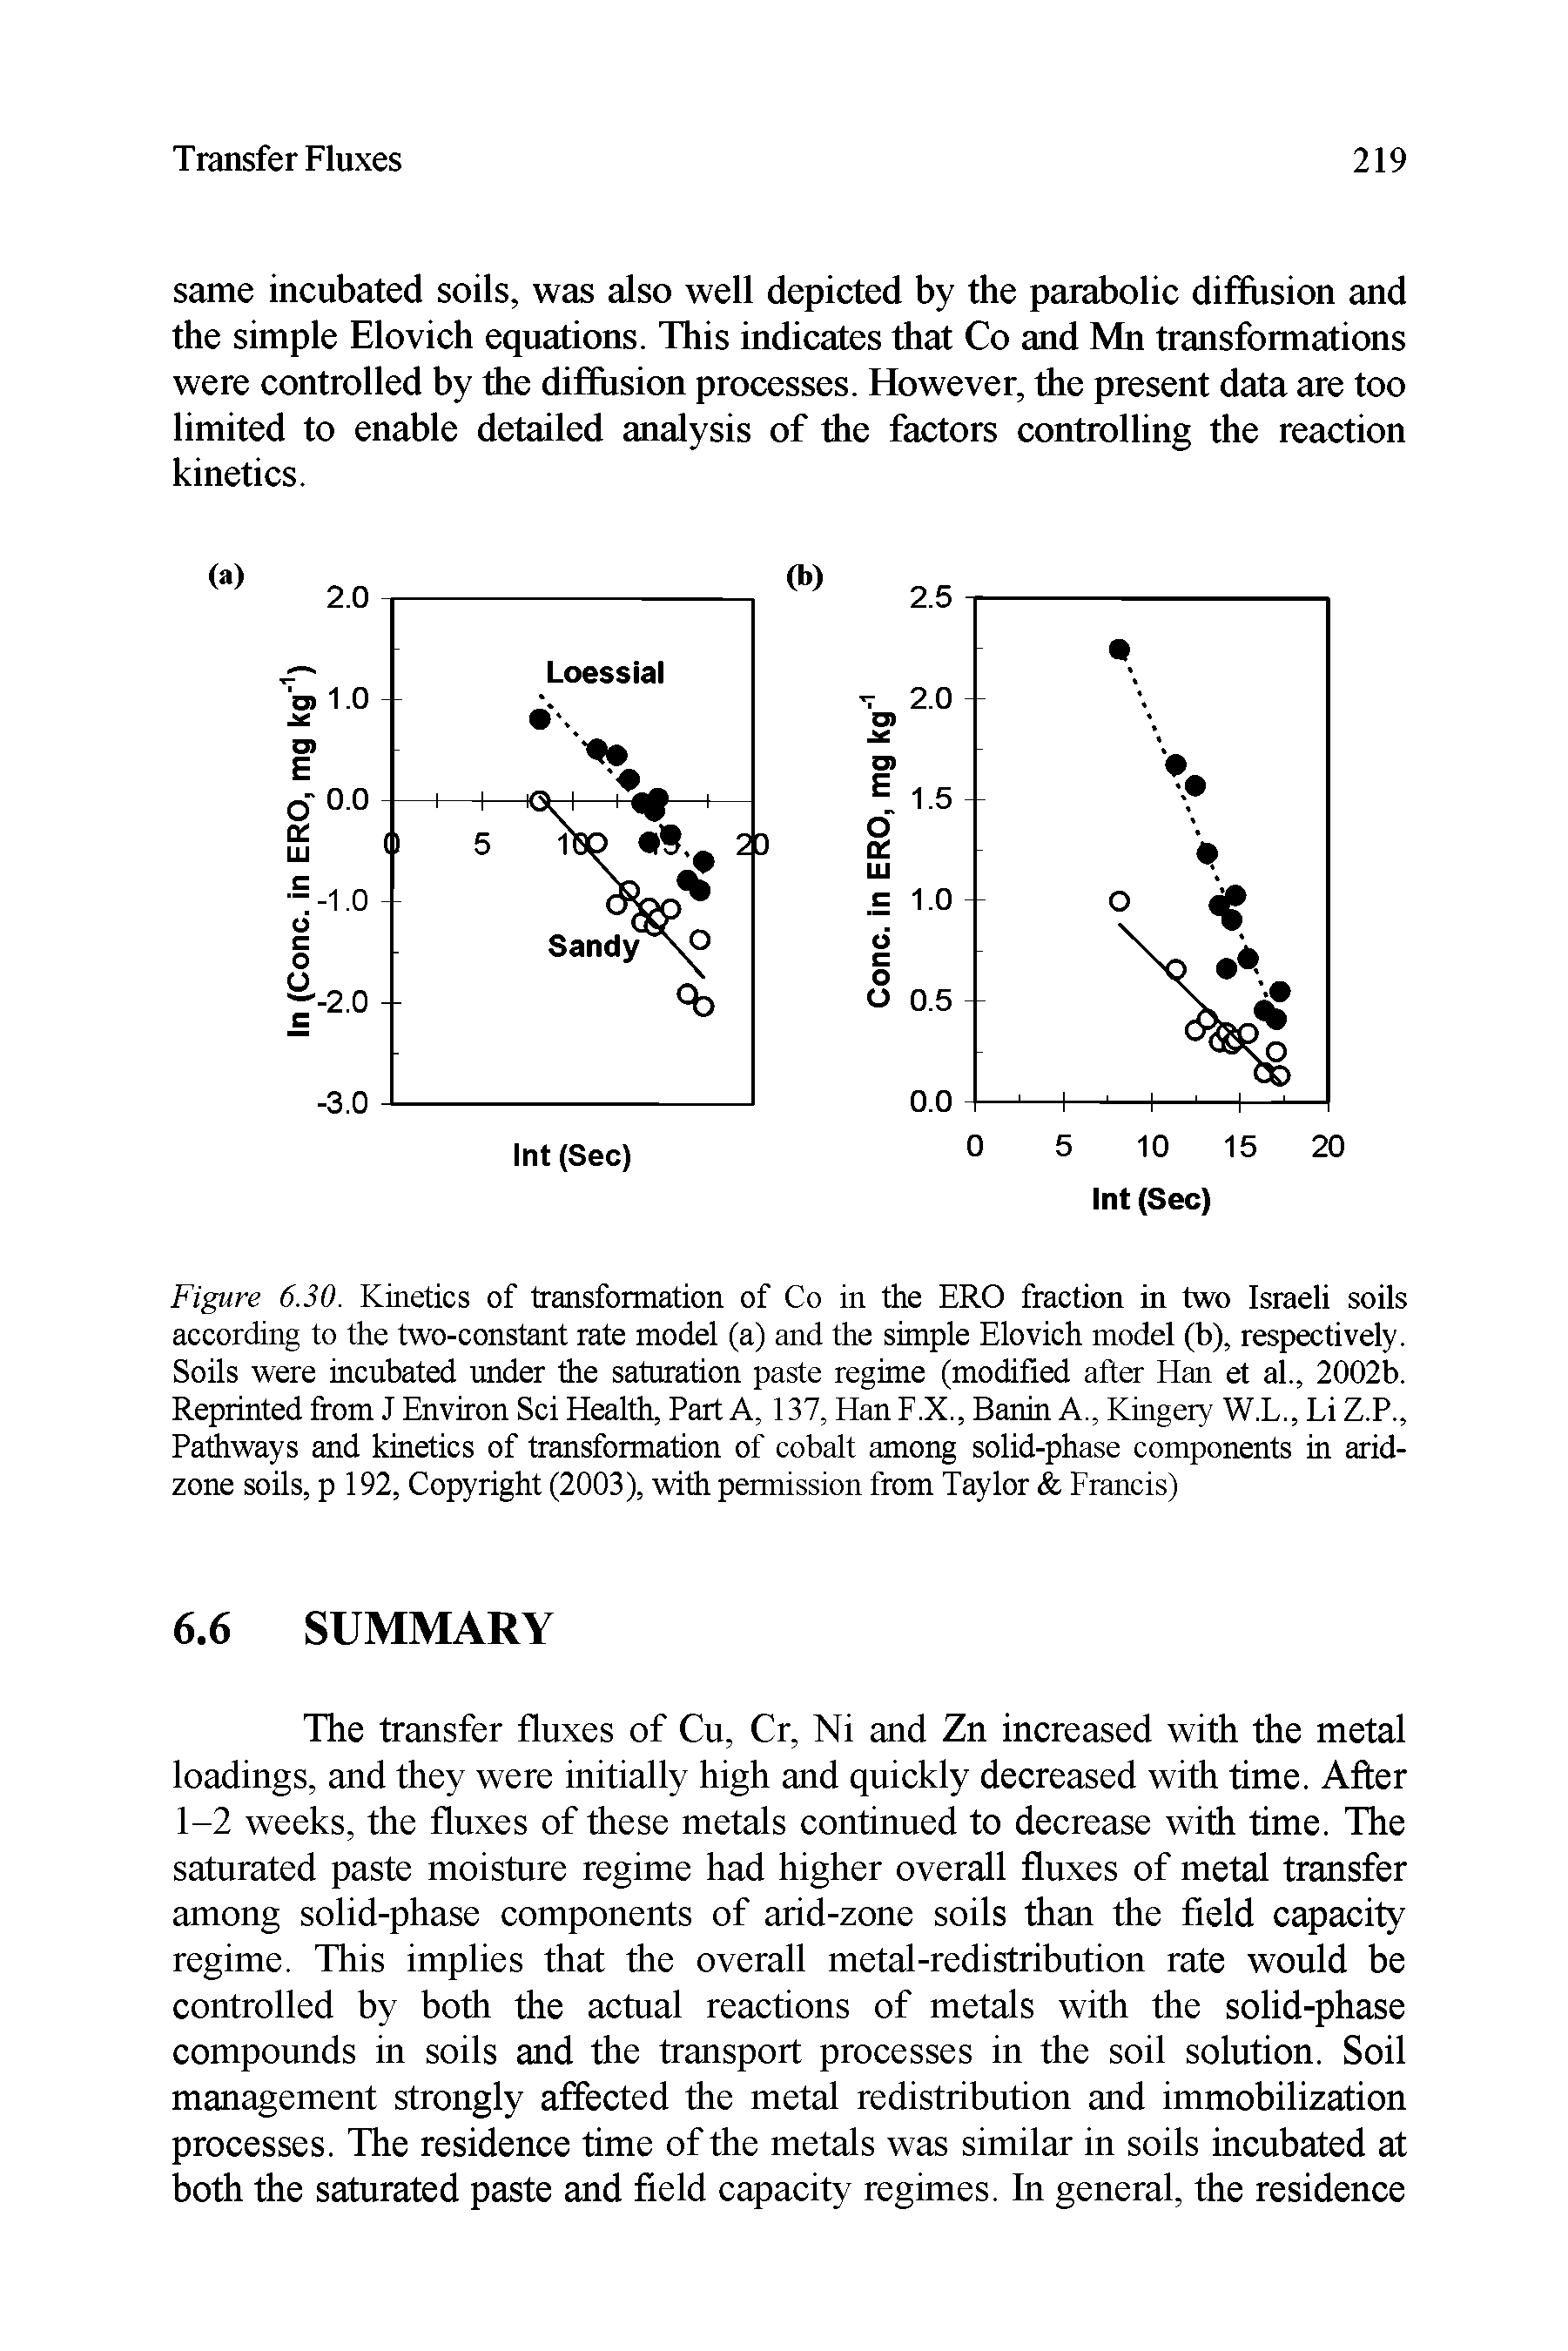 Figure 6.30. Kinetics of transformation of Co in the ERO fraction in two Israeli soils according to the two-constant rate model (a) and the simple Elovich model (b), respectively. Soils were incubated under the saturation paste regime (modified after Han et al., 2002b. Reprinted from J Environ Sci Health, Part A, 137, HanF.X., Banin A., Kingery W.L., Li Z.P., Pathways and kinetics of transformation of cobalt among solid-phase components in arid-zone soils, p 192, Copyright (2003), with permission from Taylor Francis)...